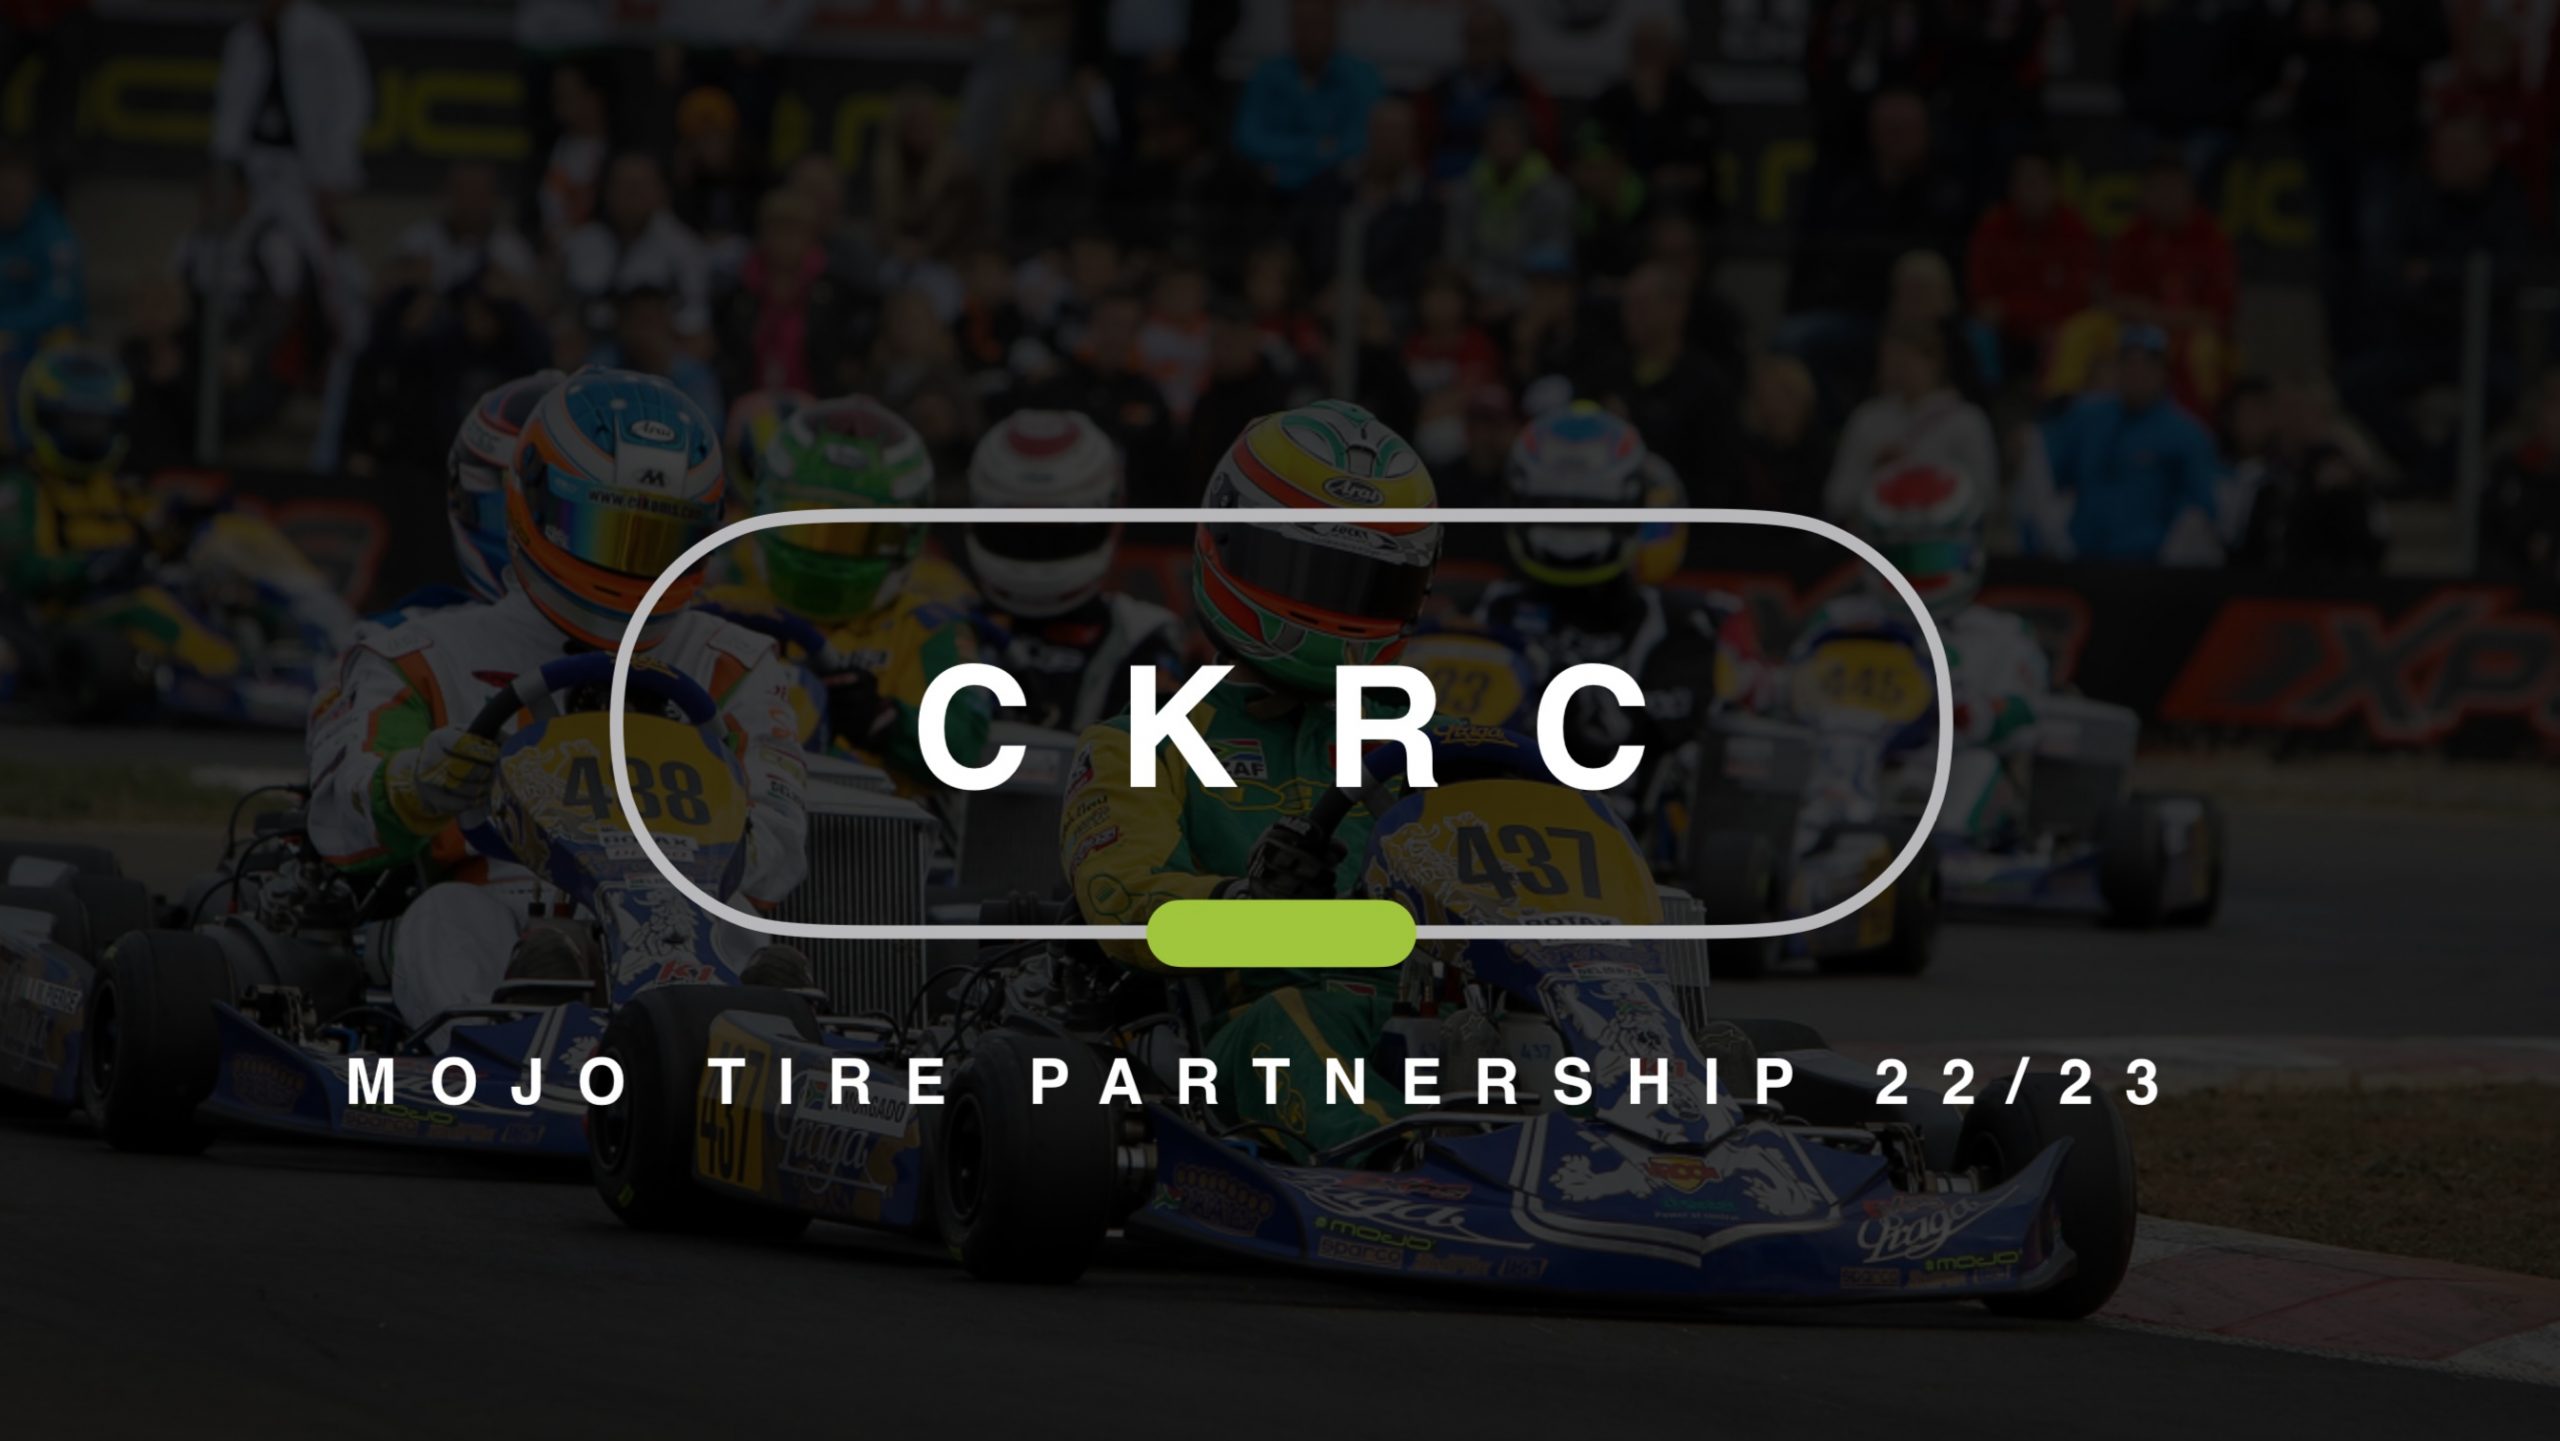 Mojo Tires Are the Grip Of Choice For CKRC